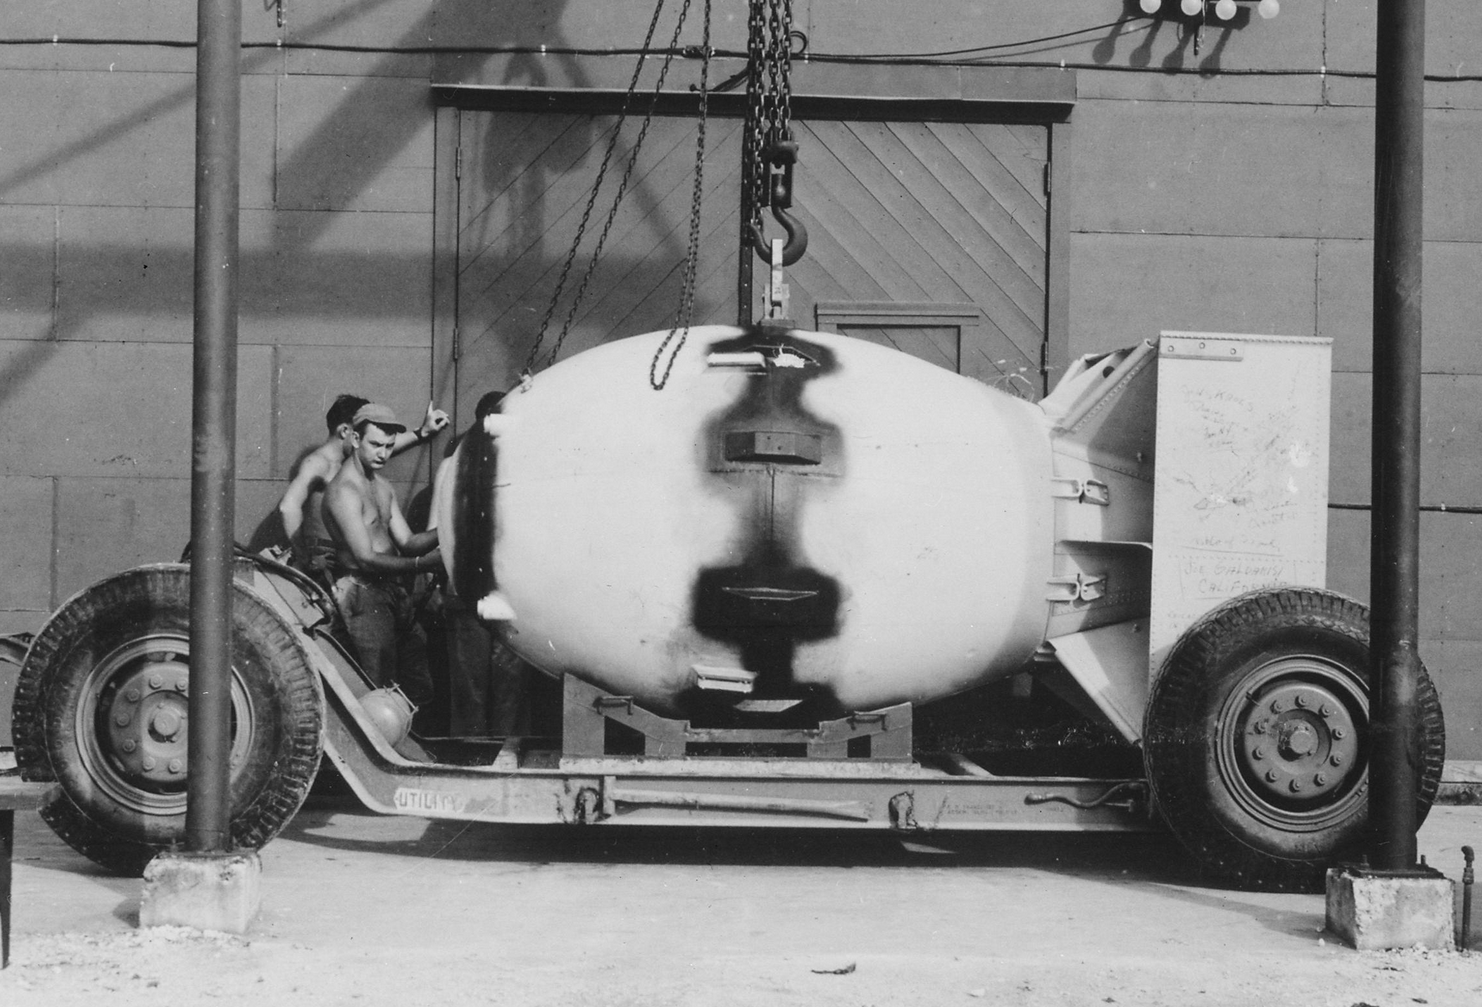 The Mark III "Fat Man" bomb loaded on its carrier, 8 August 1945.